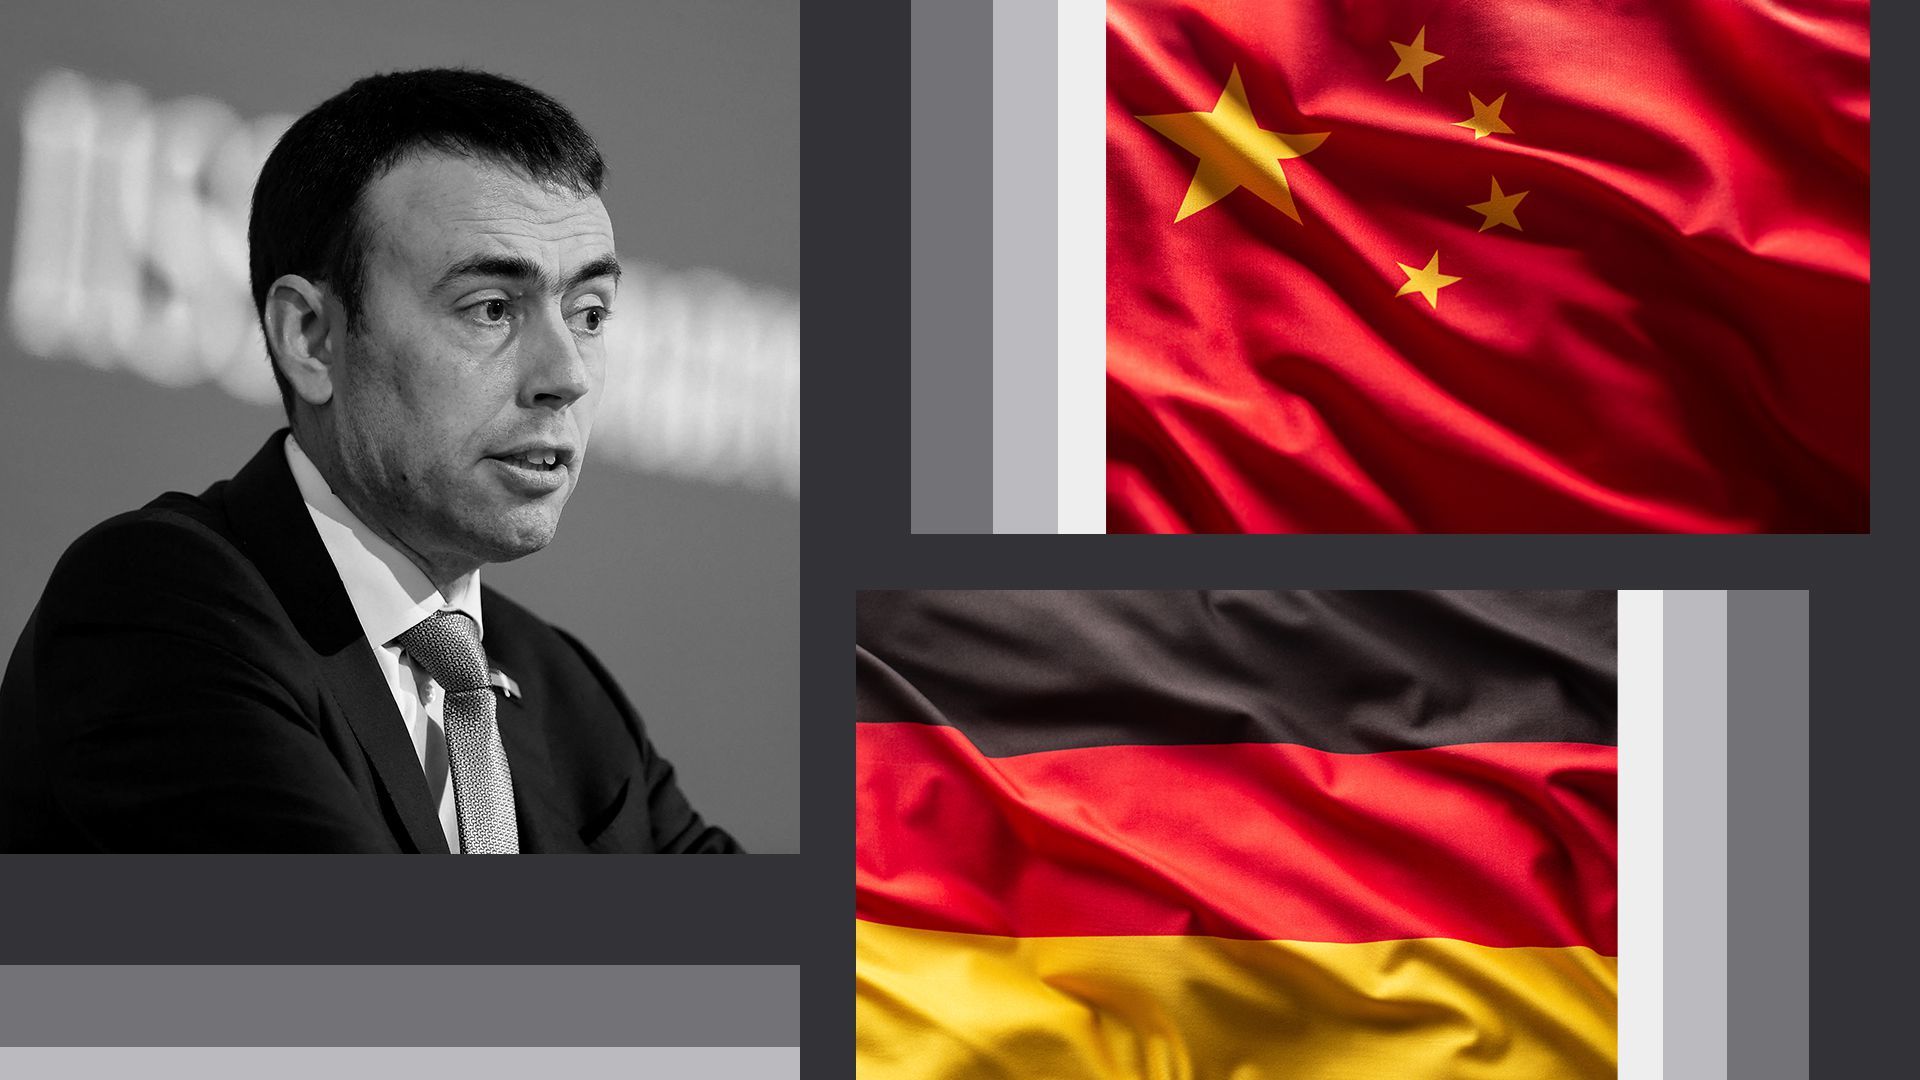 Photo collage illustration of Nils Schmid and flags of Germany and China